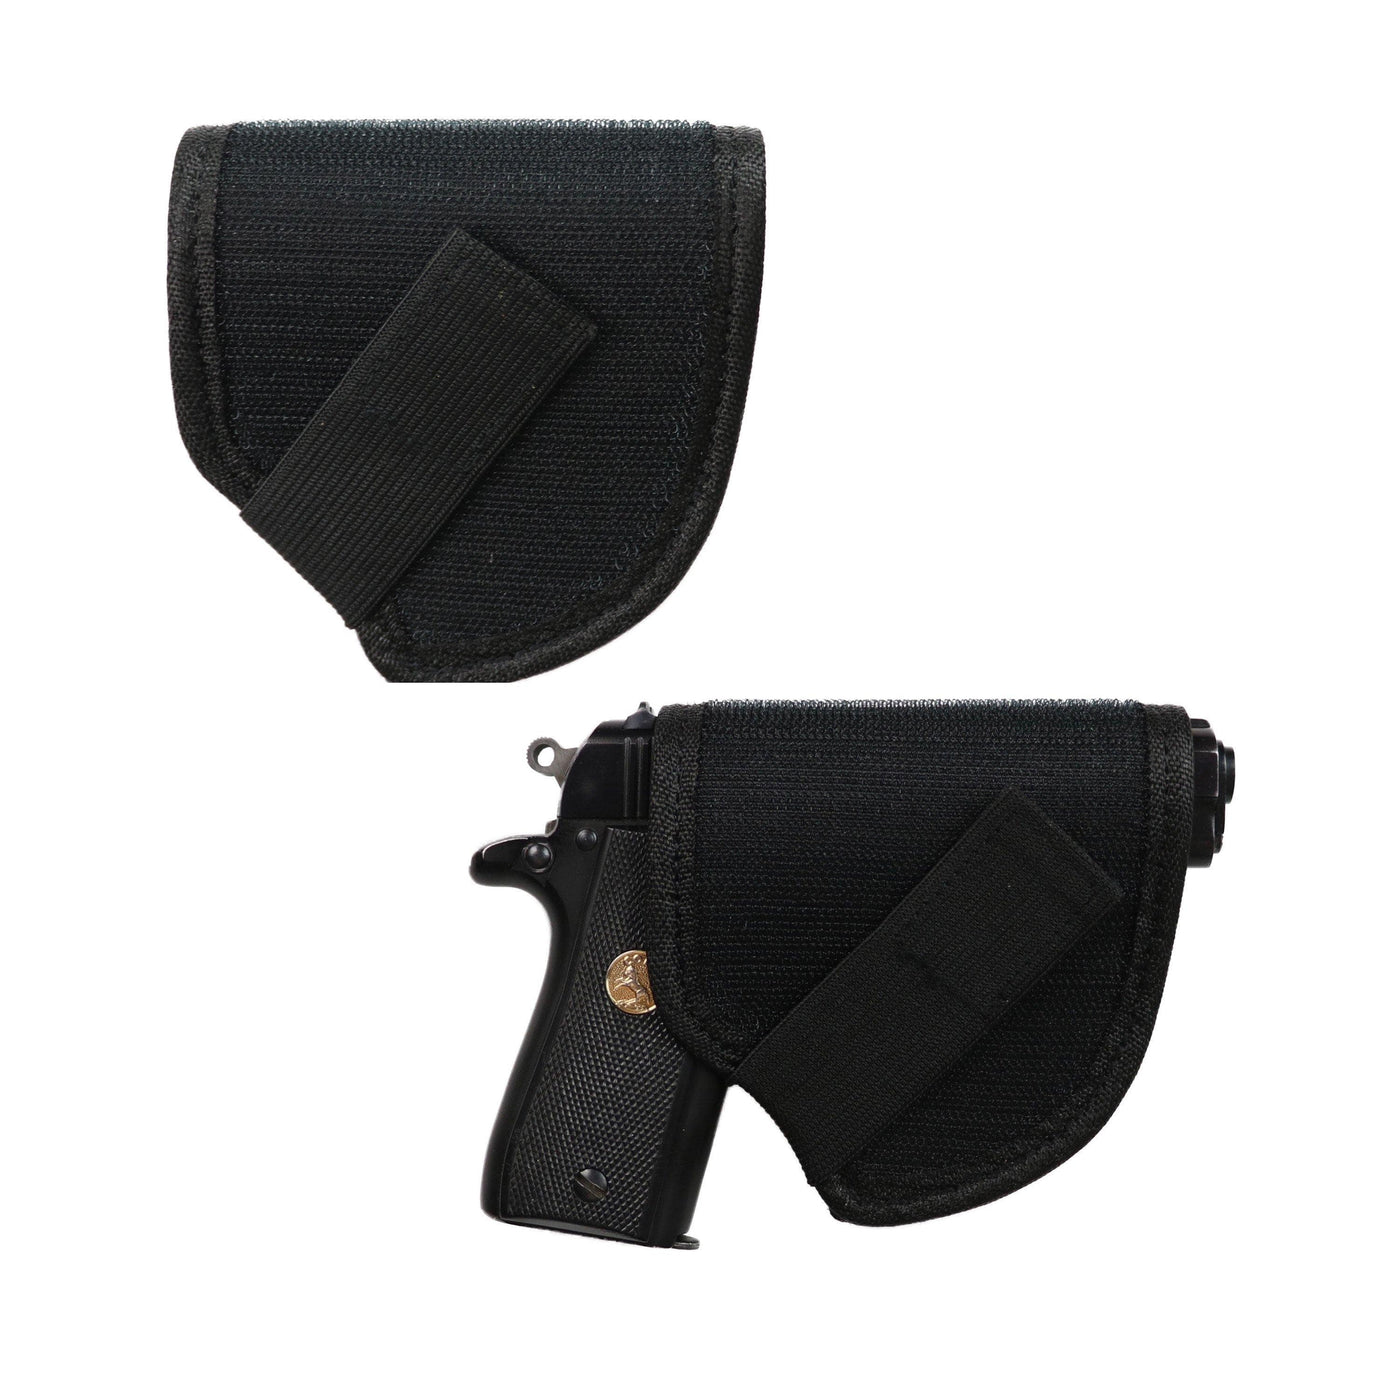 Lady Conceal Concealed Carry Purse Black Concealed Carry Evelyn Leather Crossbody Holster by Lady Conceal